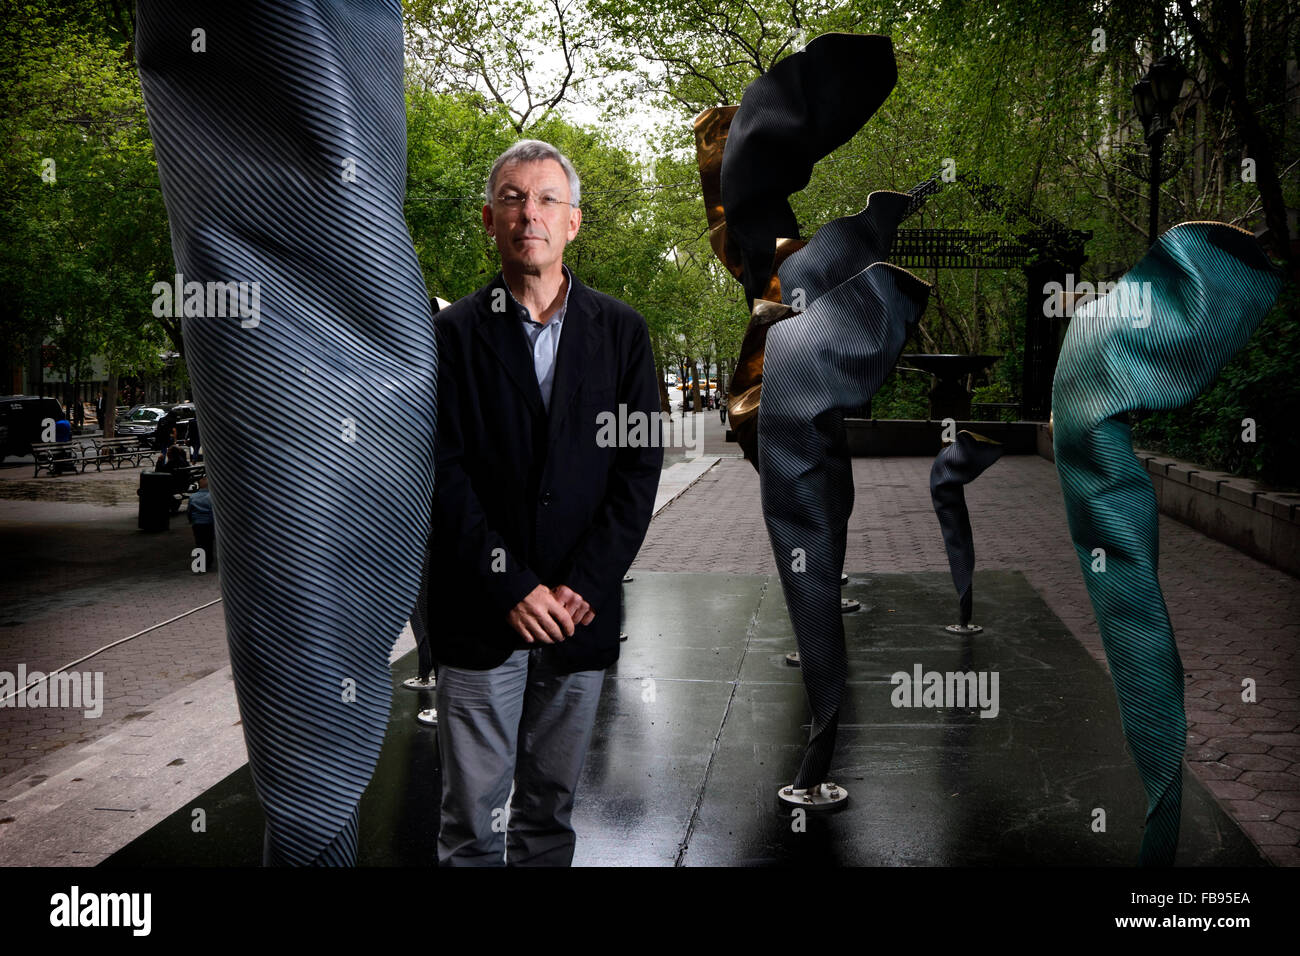 The launch of Australian sculptor Andrew Rogers nstallation 'Individuals' at the Dag Hammarskjold Plaza in New York City, May 7, Stock Photo